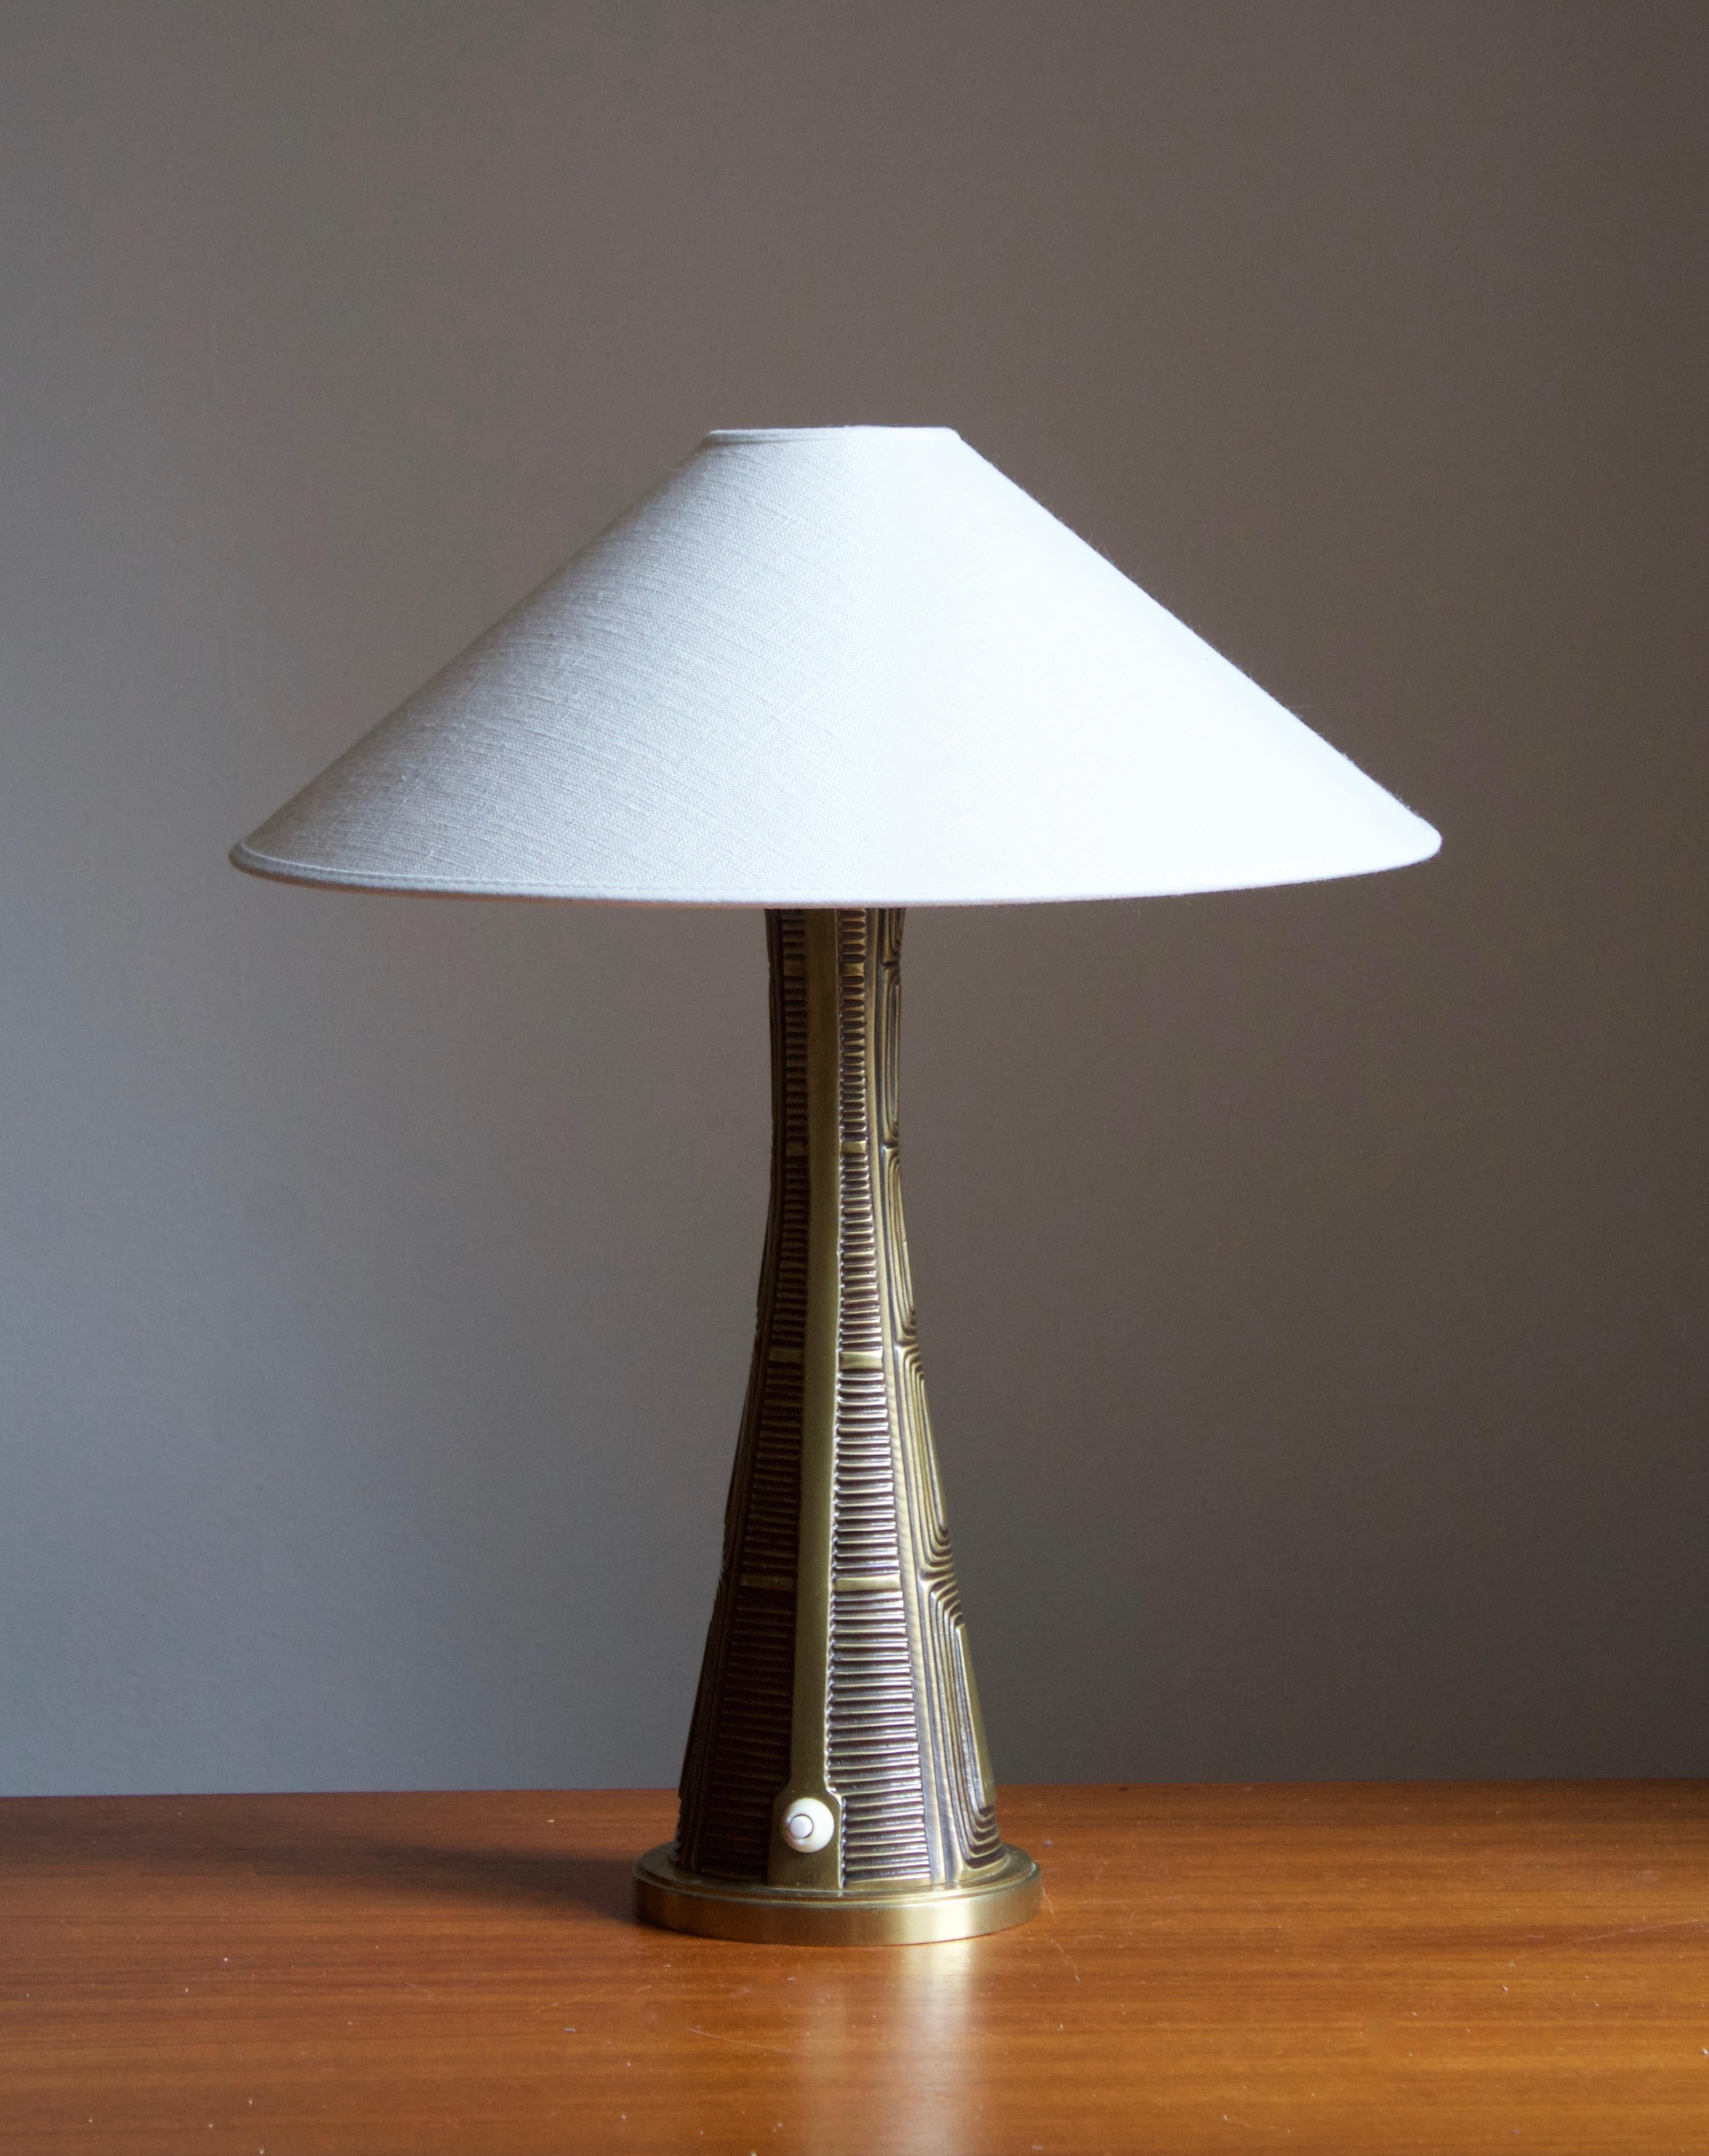 A table lamp / desk light. Designed by Swedish sculptor Sonja Katzin, (1919-2014). Produced by ASEA, Sweden, 1950s. Stamped.

Stated dimensions exclude lampshades. Height includes sockets. Sold without lampshade.